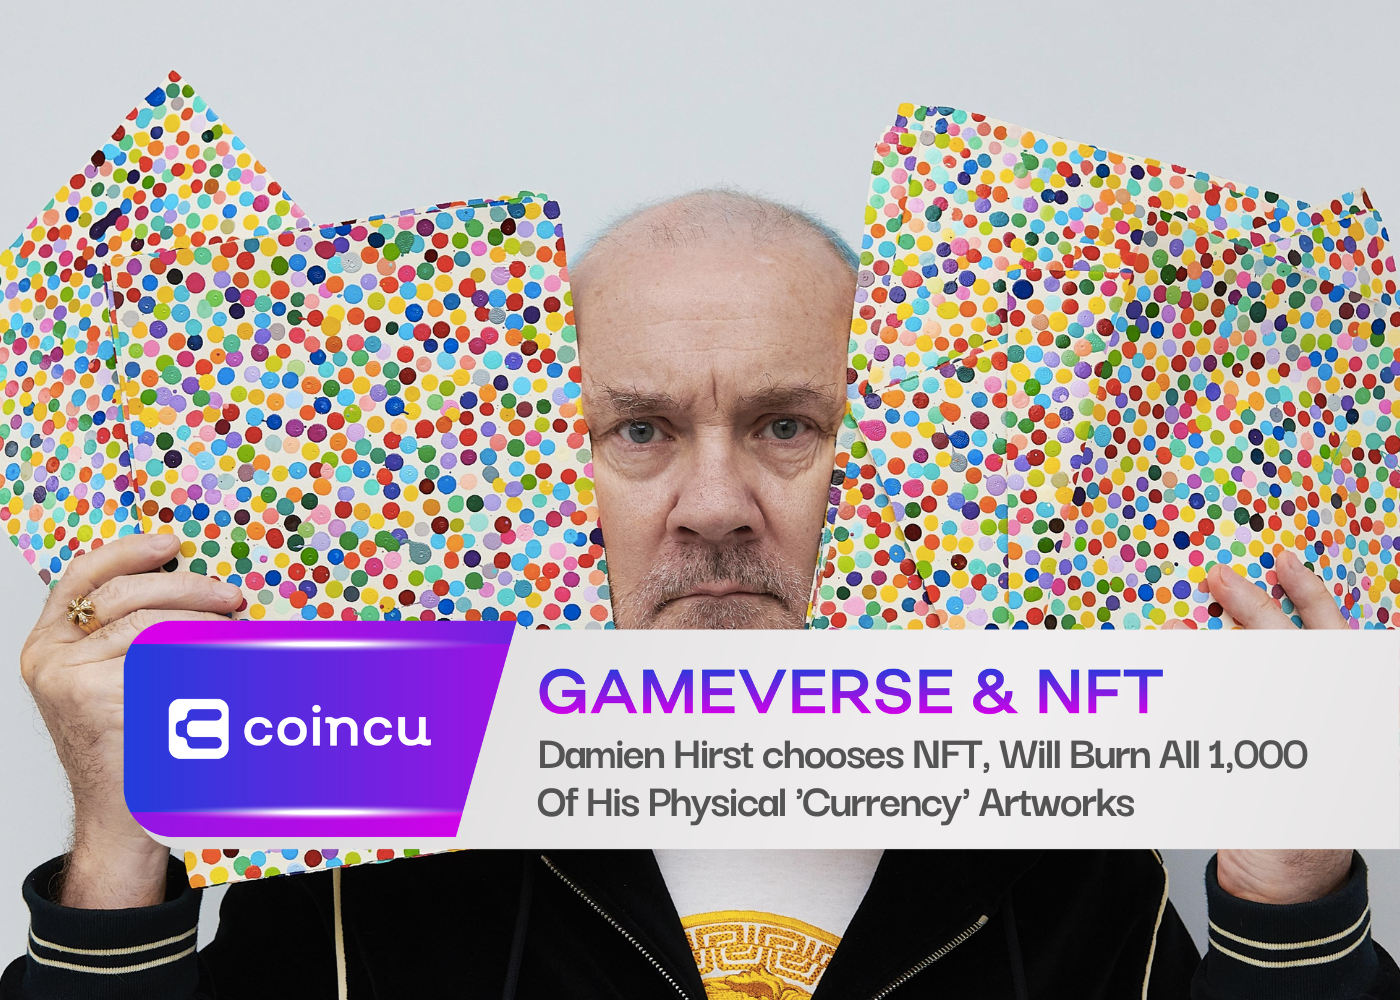 Damien Hirst chooses NFT, Will Burn All 1,000 Of His Physical 'Currency' Artworks